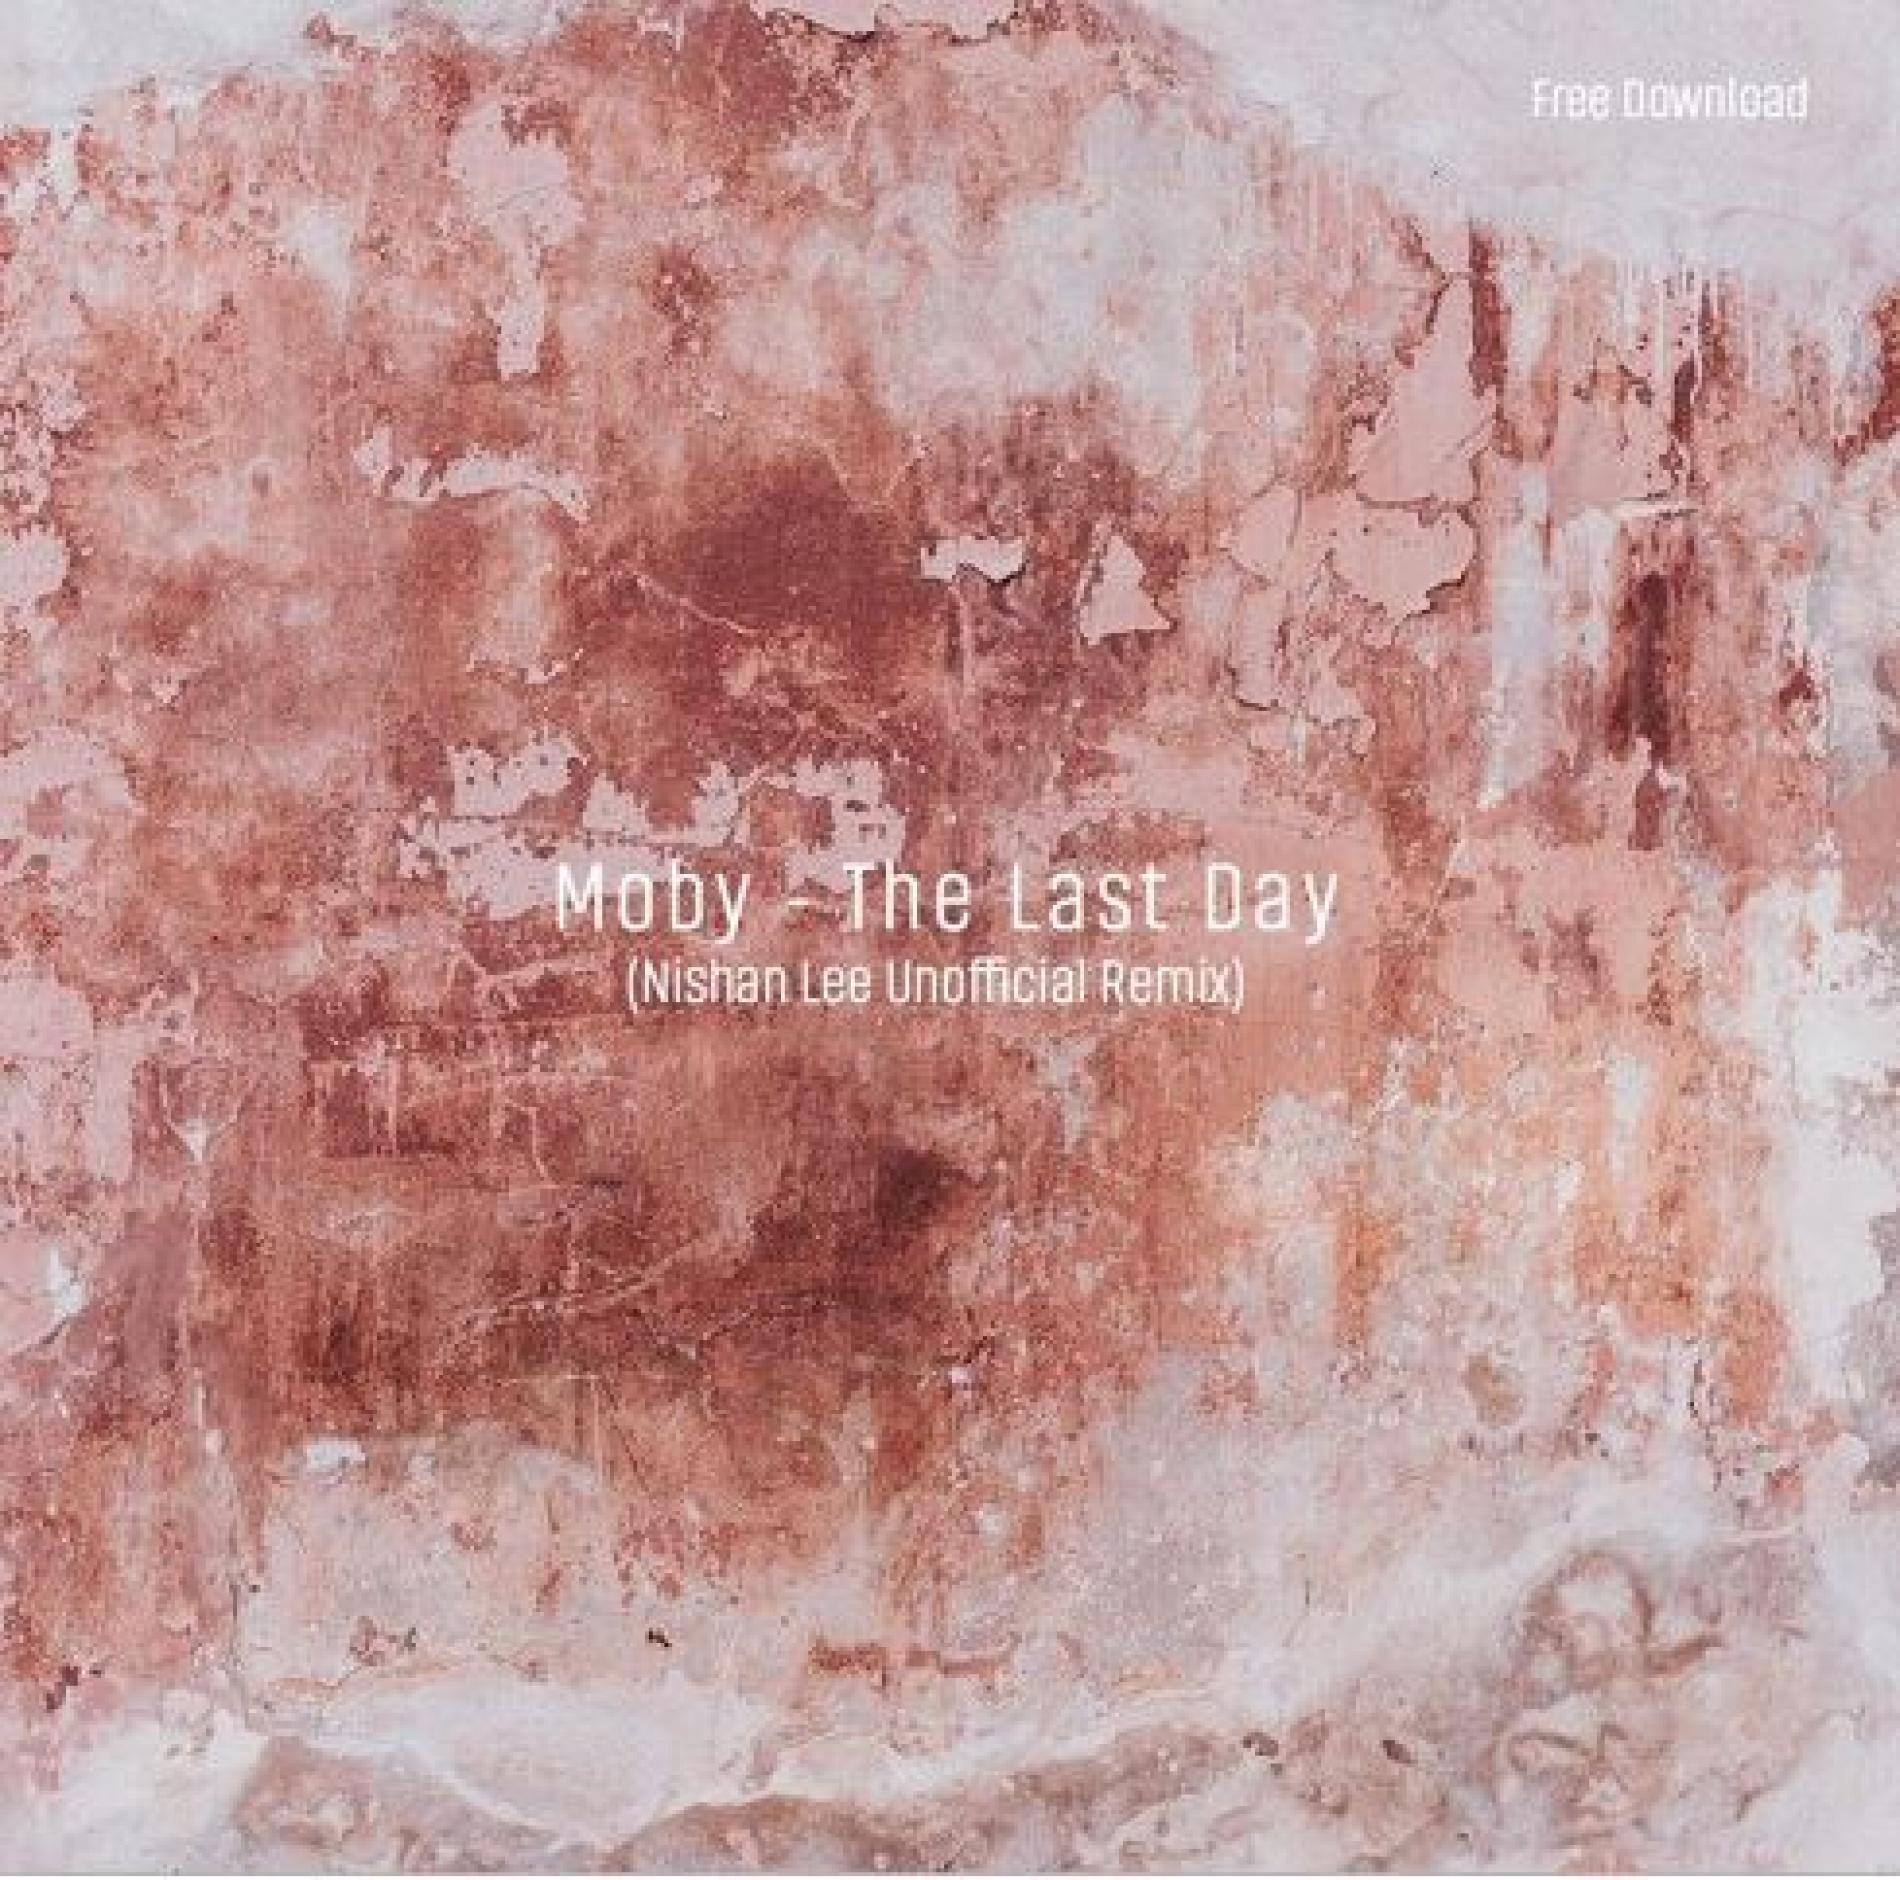 Moby – The Last Day (Nishan Lee Unofficial Remix) [Free Download]